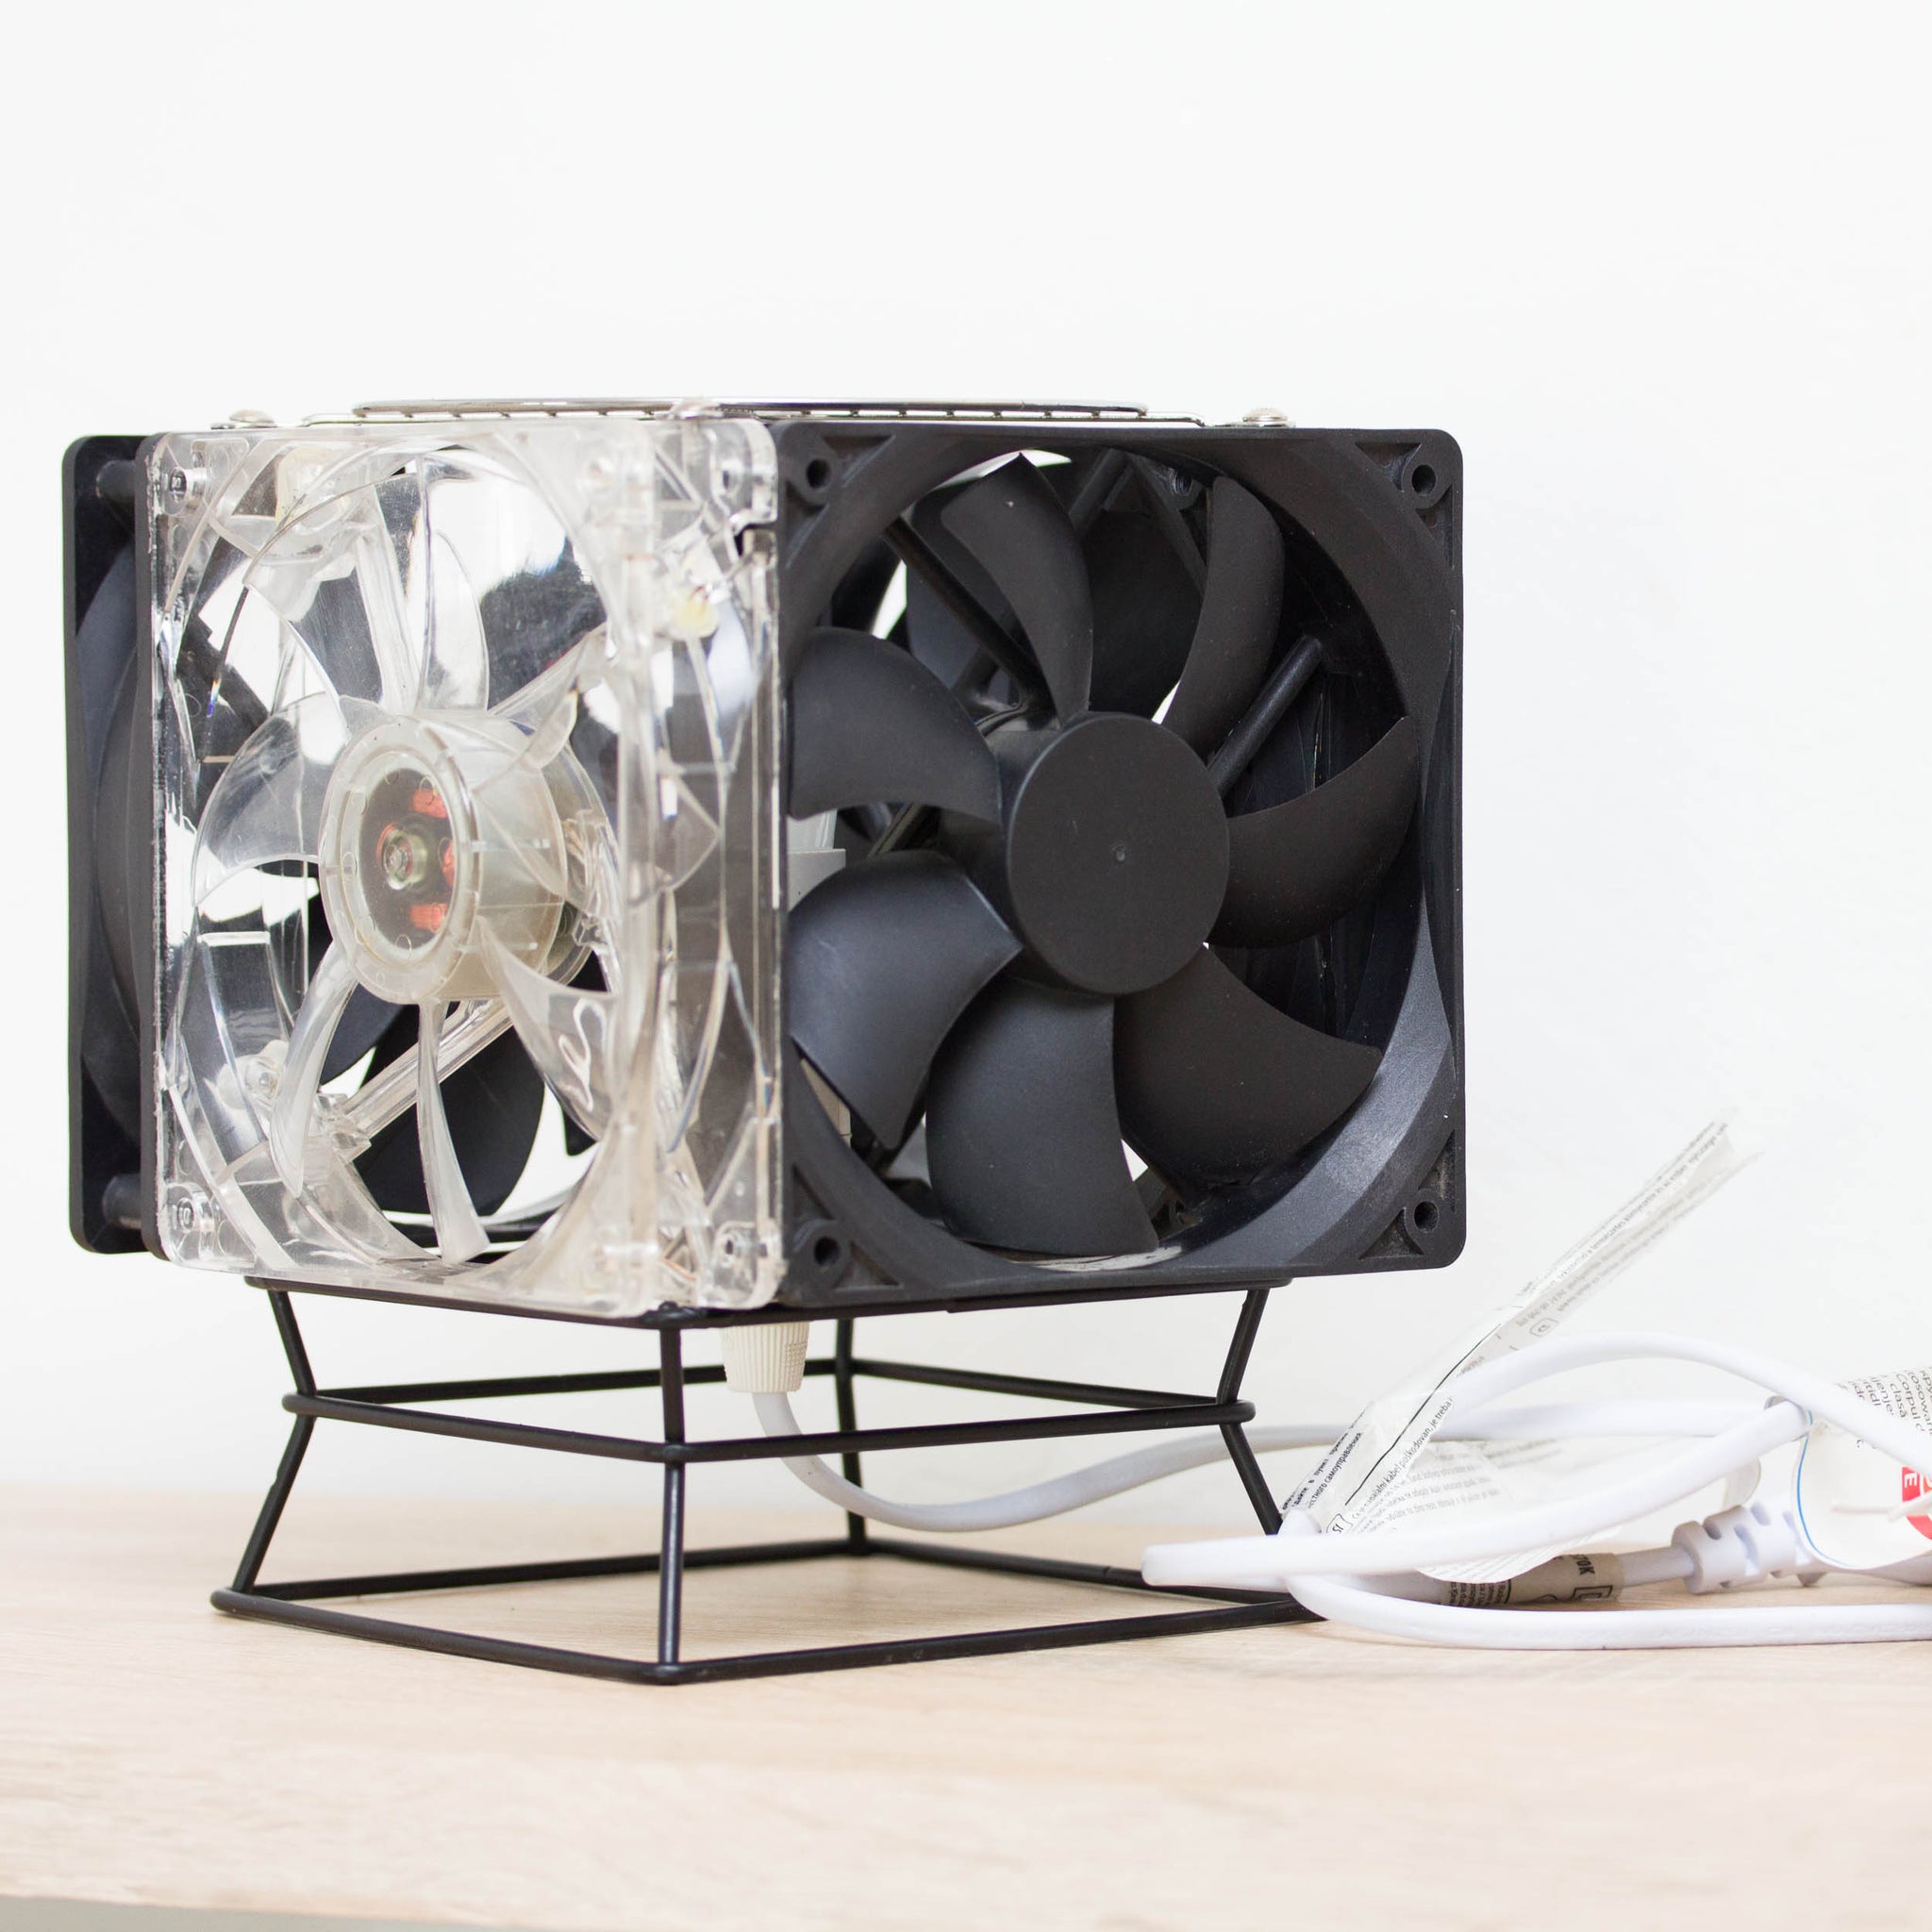 Table lamp made with recycled computer Cooling Fans